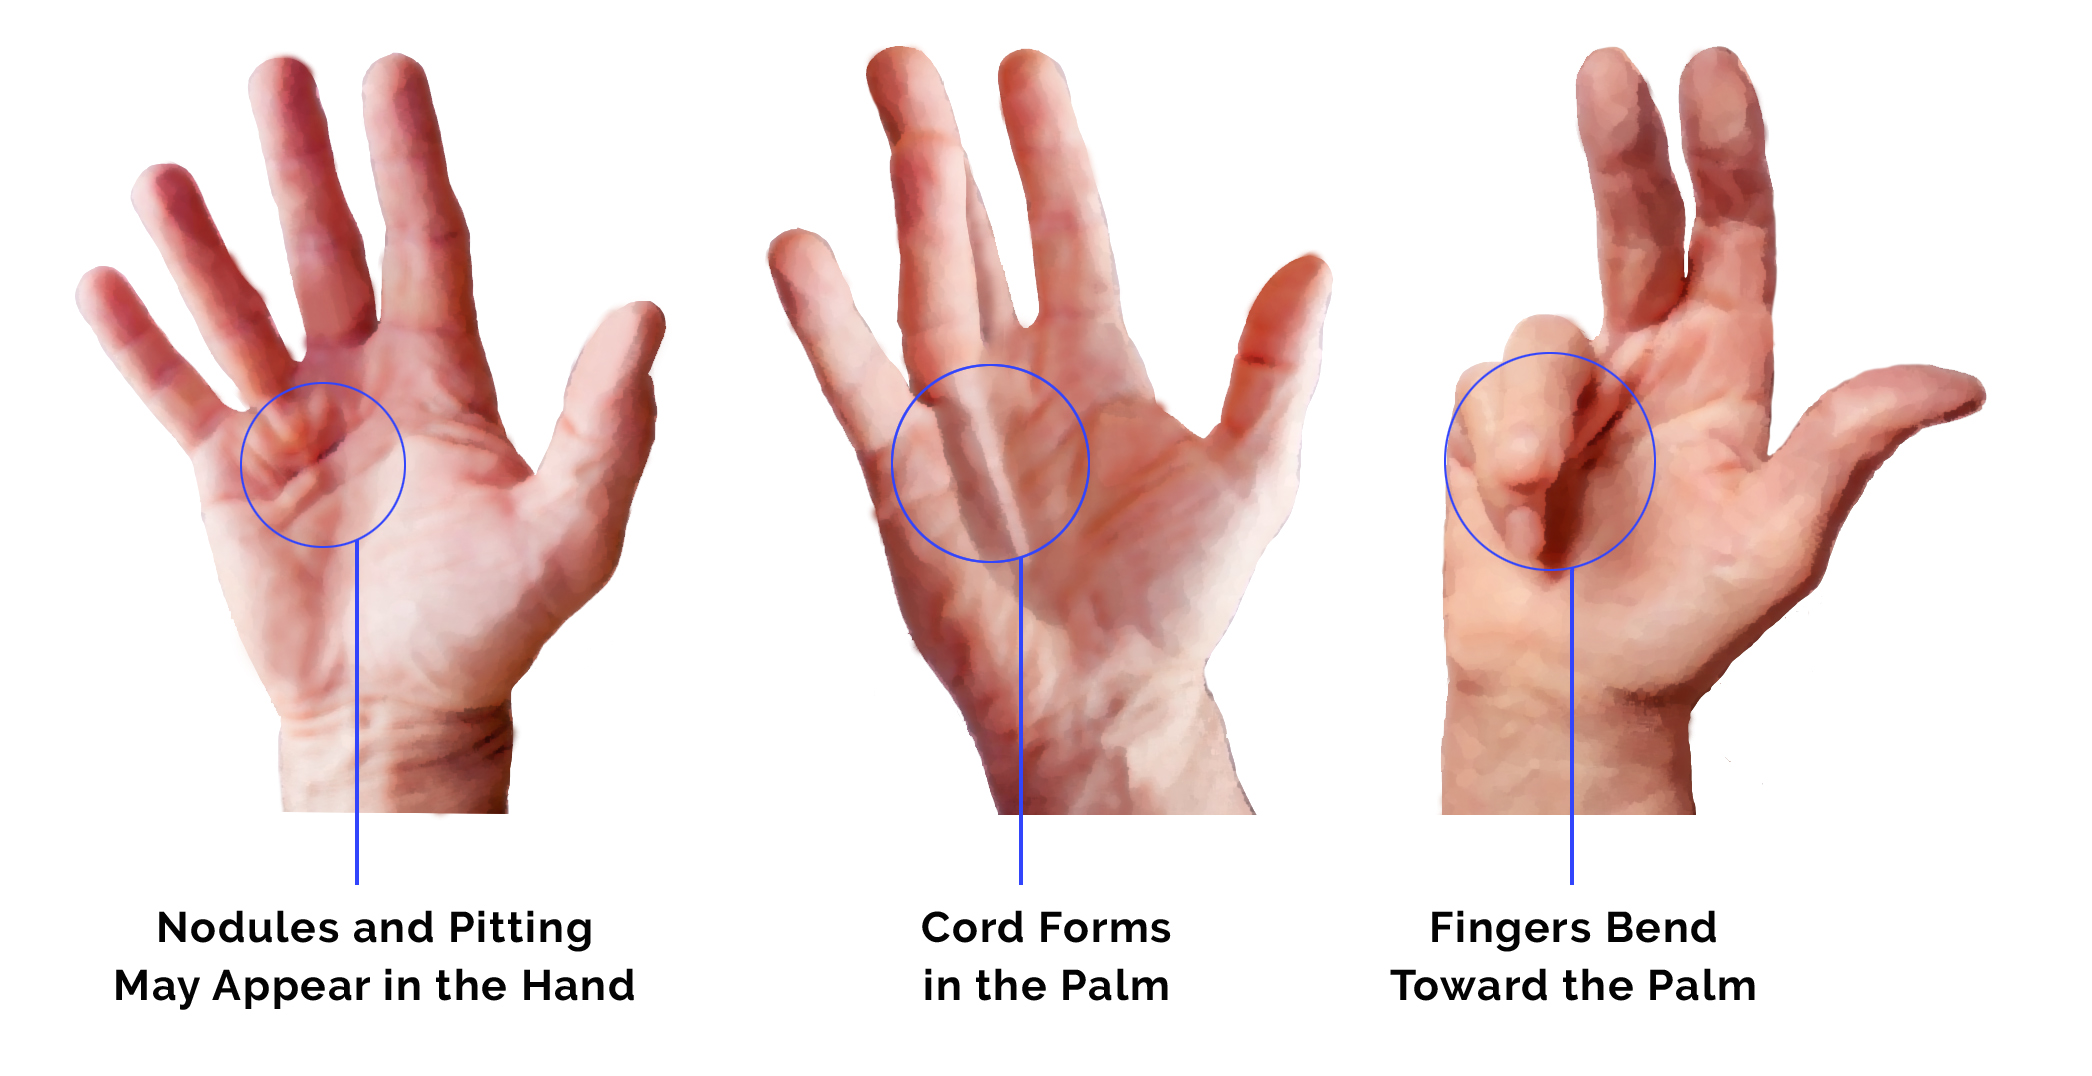 Symptoms and Treatment for a Bent Finger